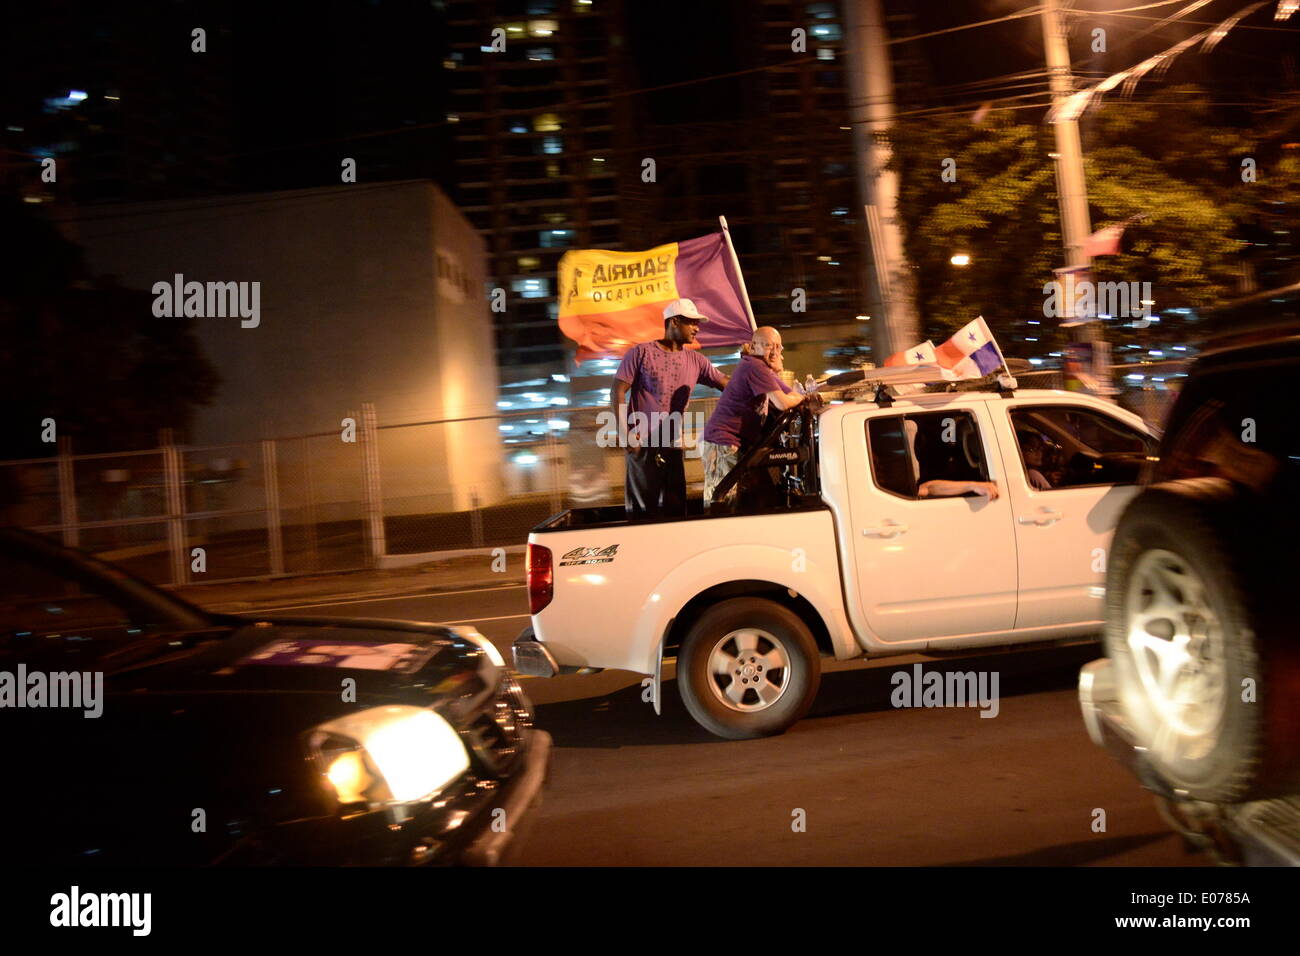 Panama City, Panama. 4th May, 2014. Supporters of presidential candidate Juan Carlos Varela from the Panamenista Party take part in a caravan after the preliminary results of the general elections, in Panama City, capital of Panama, on May 4, 2014. Erasmo Pinilla, President of the Panamanian Electoral Tribunal, informed on Sunday night that Juan Carlos Varela is the virtual winner of Panama's presidency, according to the local press © Mauricio Valenzuela/Xinhua/Alamy Live News Stock Photo